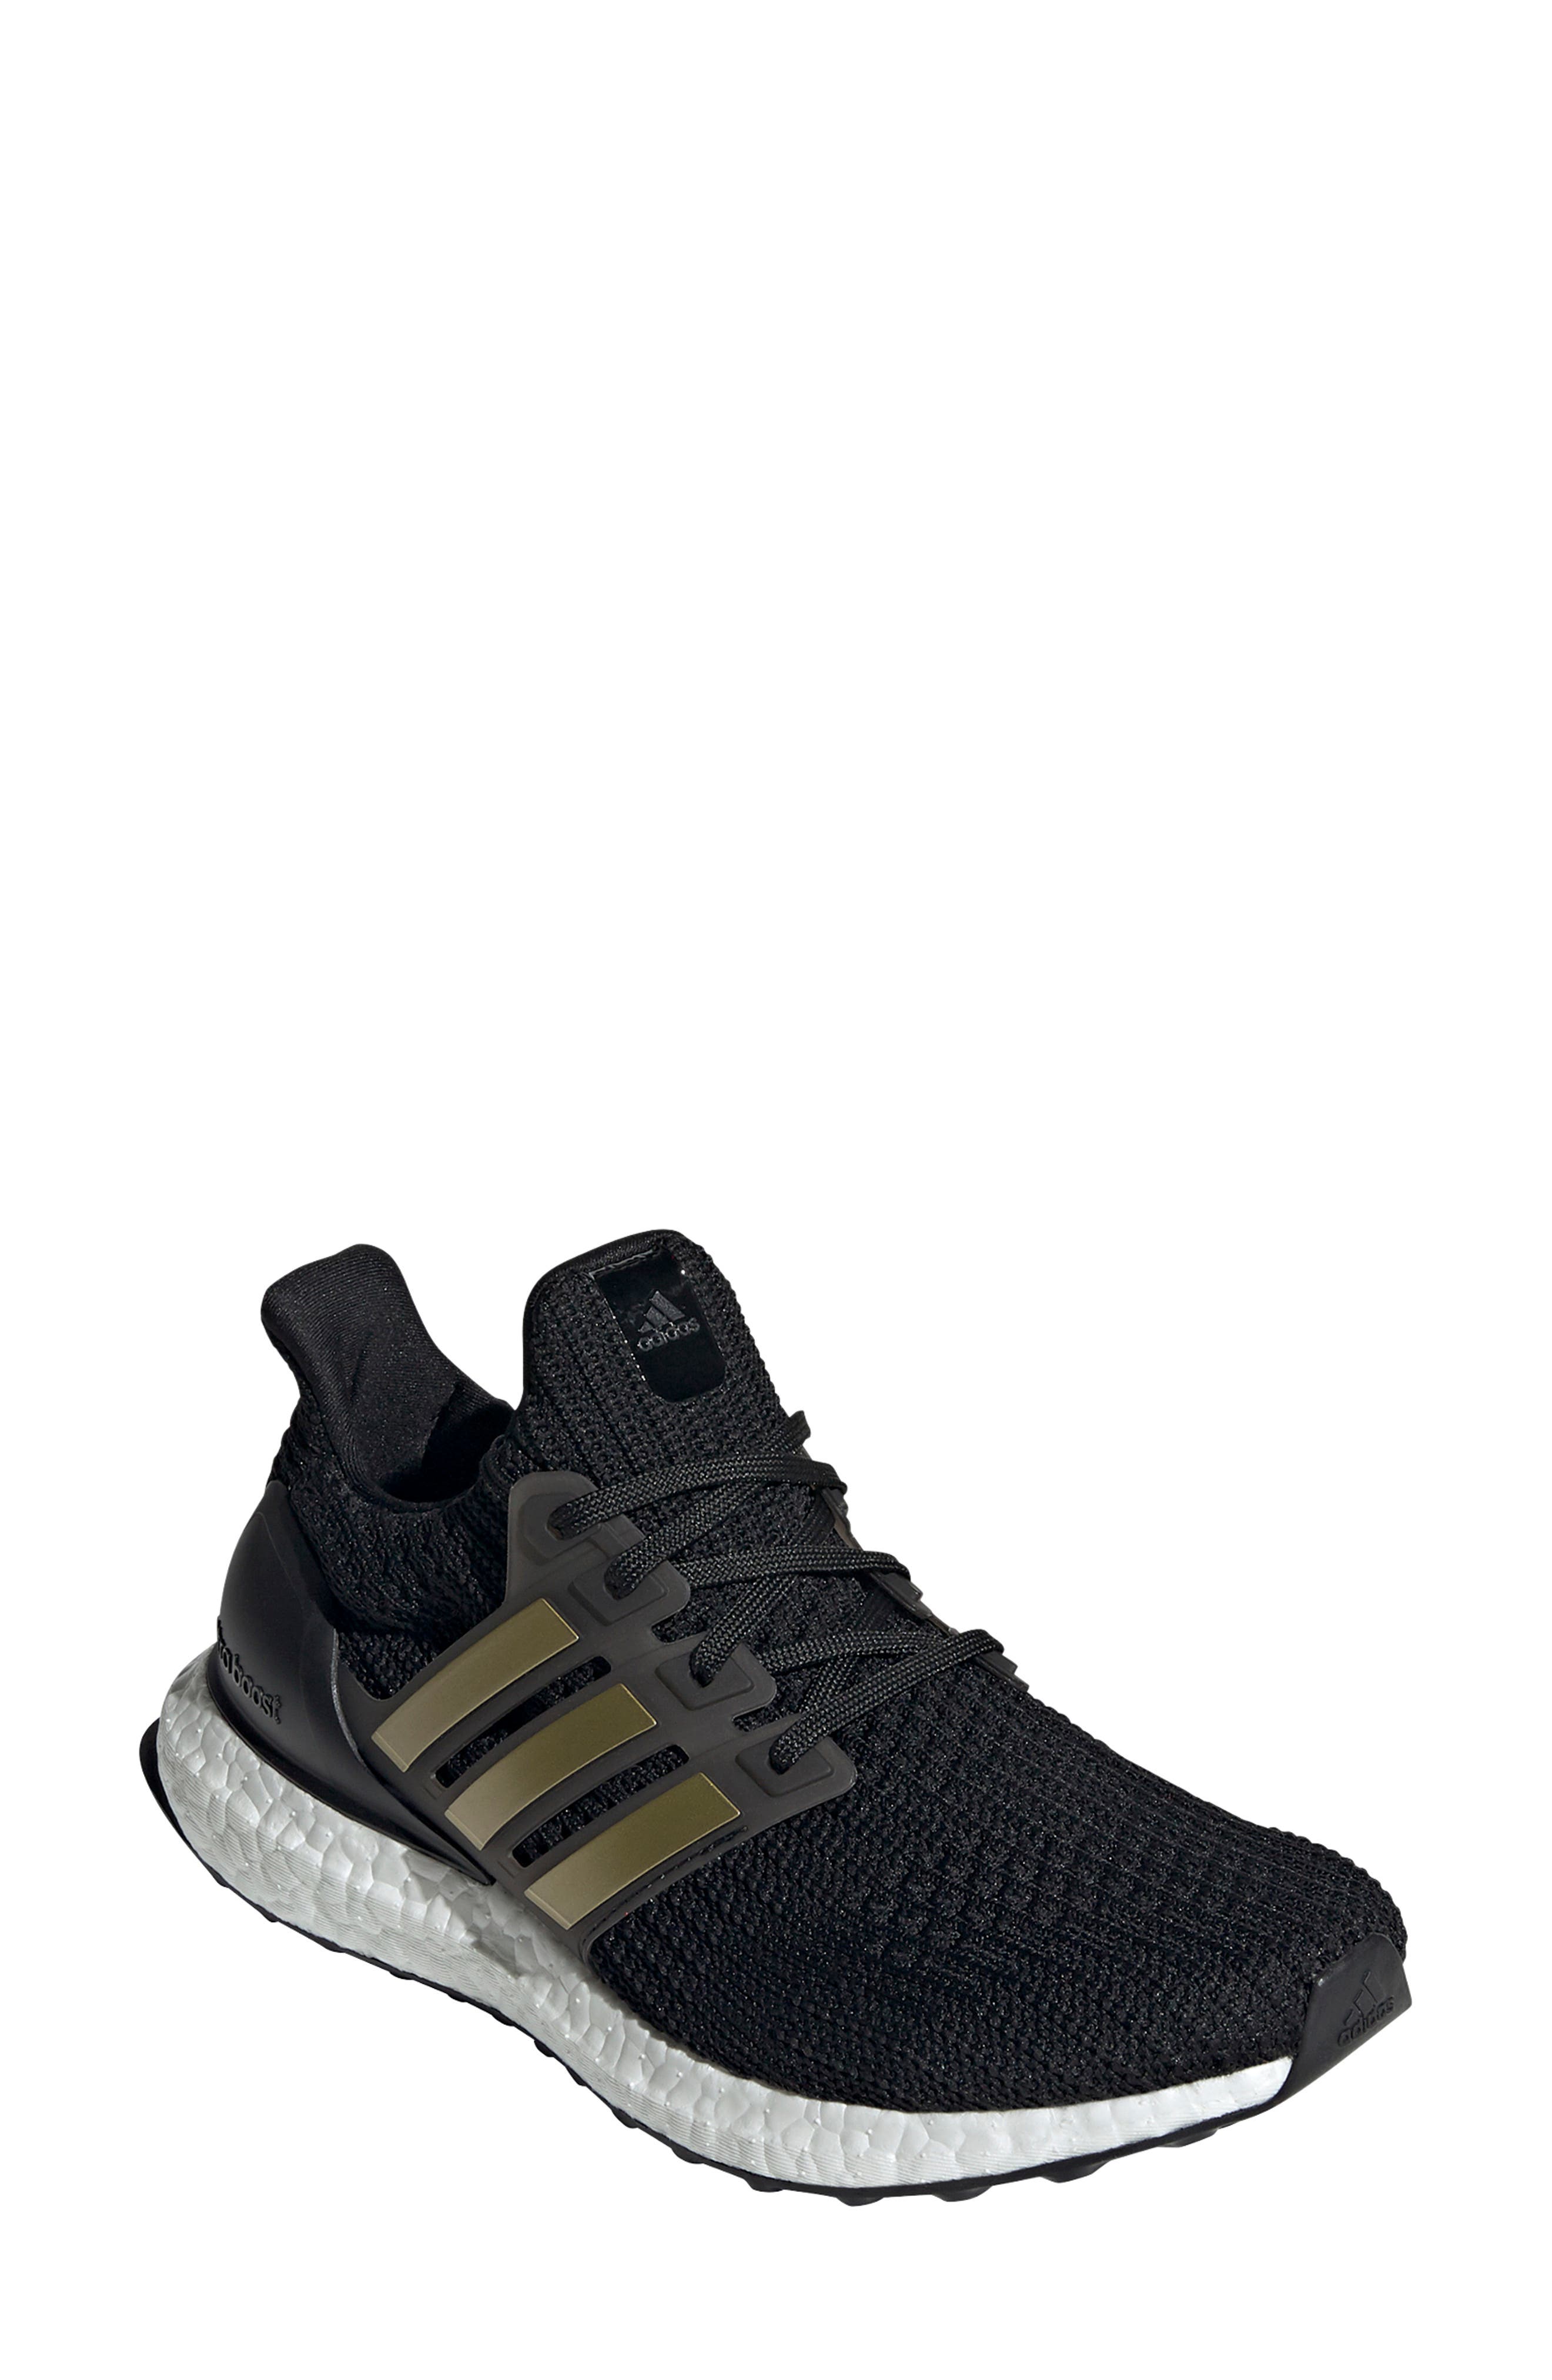 adidas ultra boost womens nordstrom